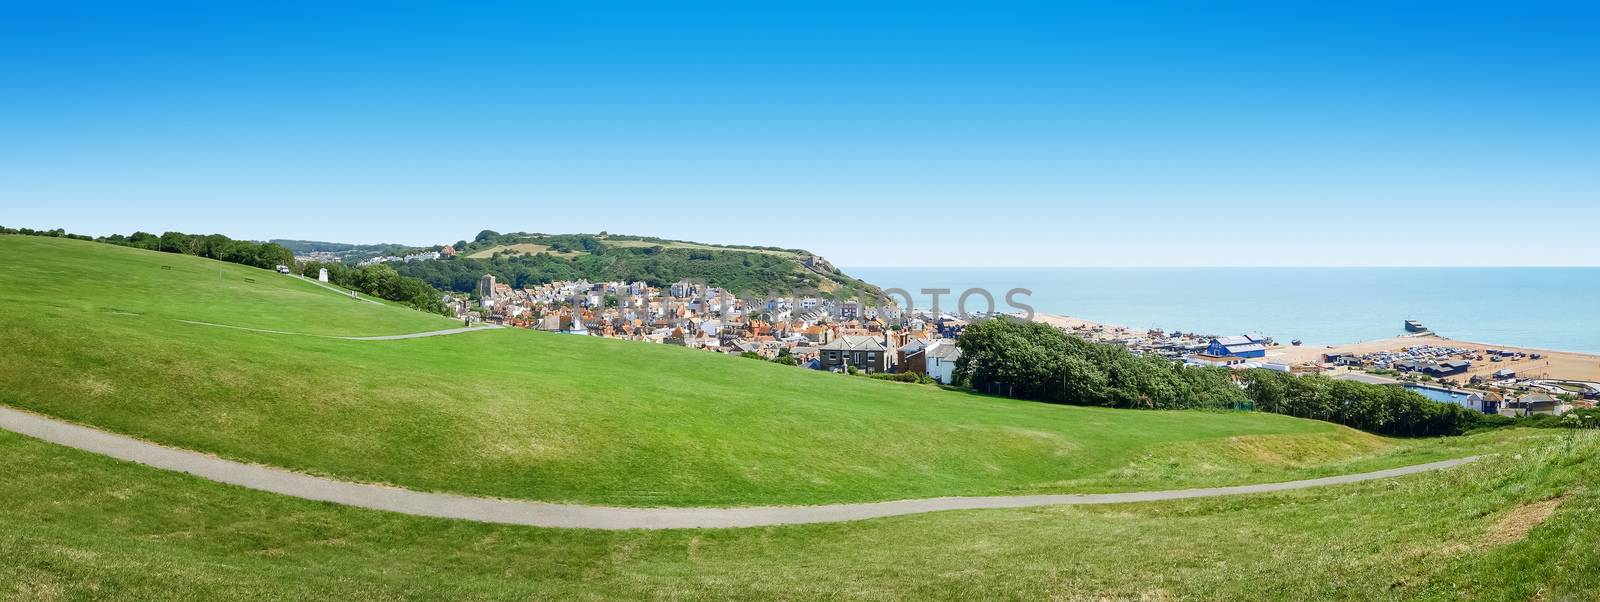 panoramic view over Hastings UK by magann